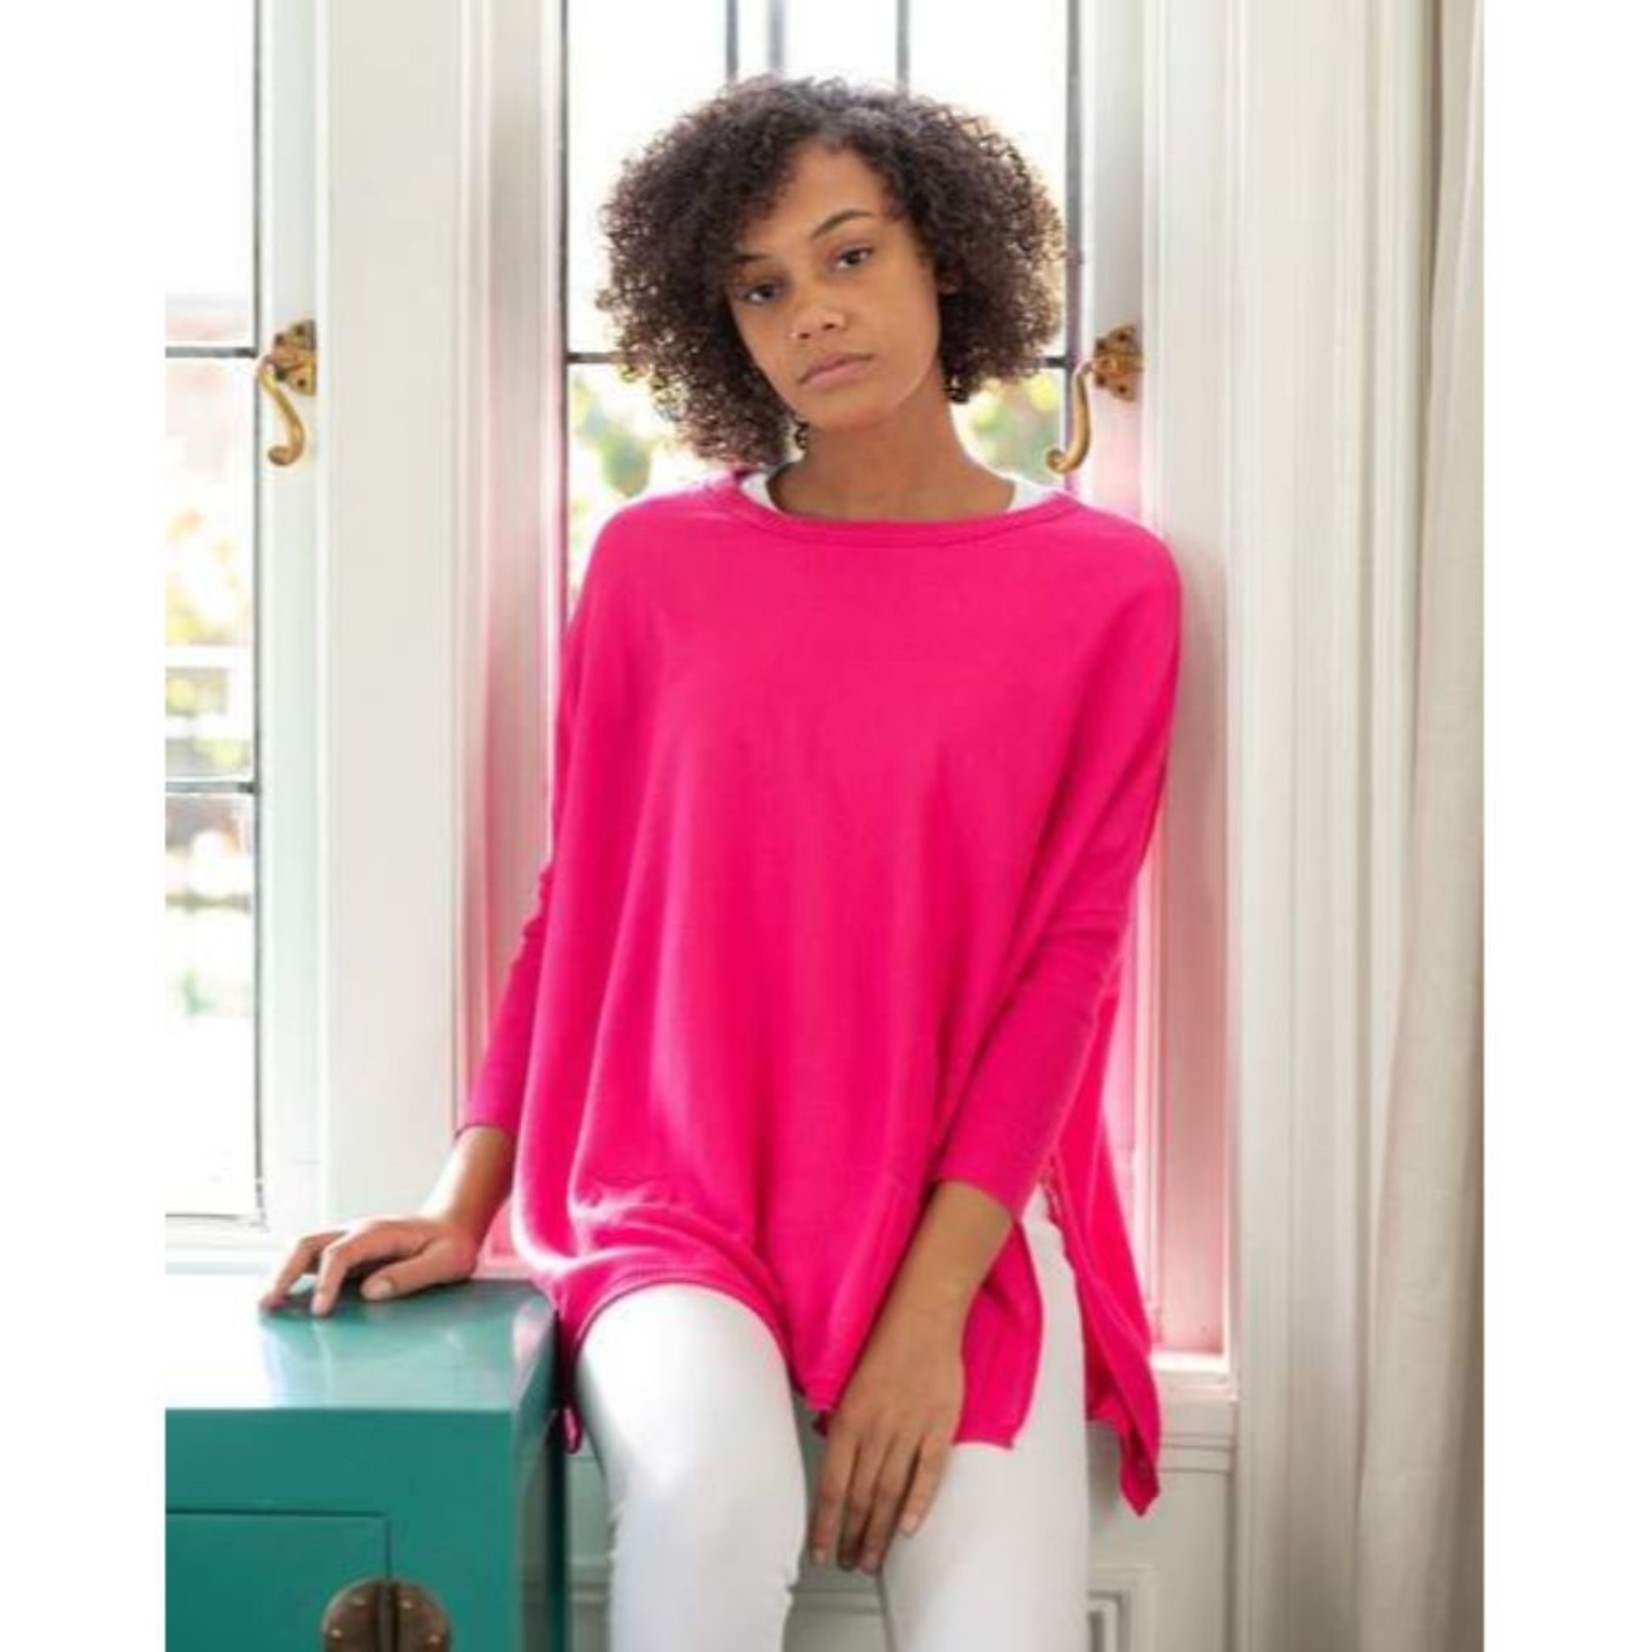 Mer-Sea & CO Catalina Crewneck Travel Sweater_Pink_One Size